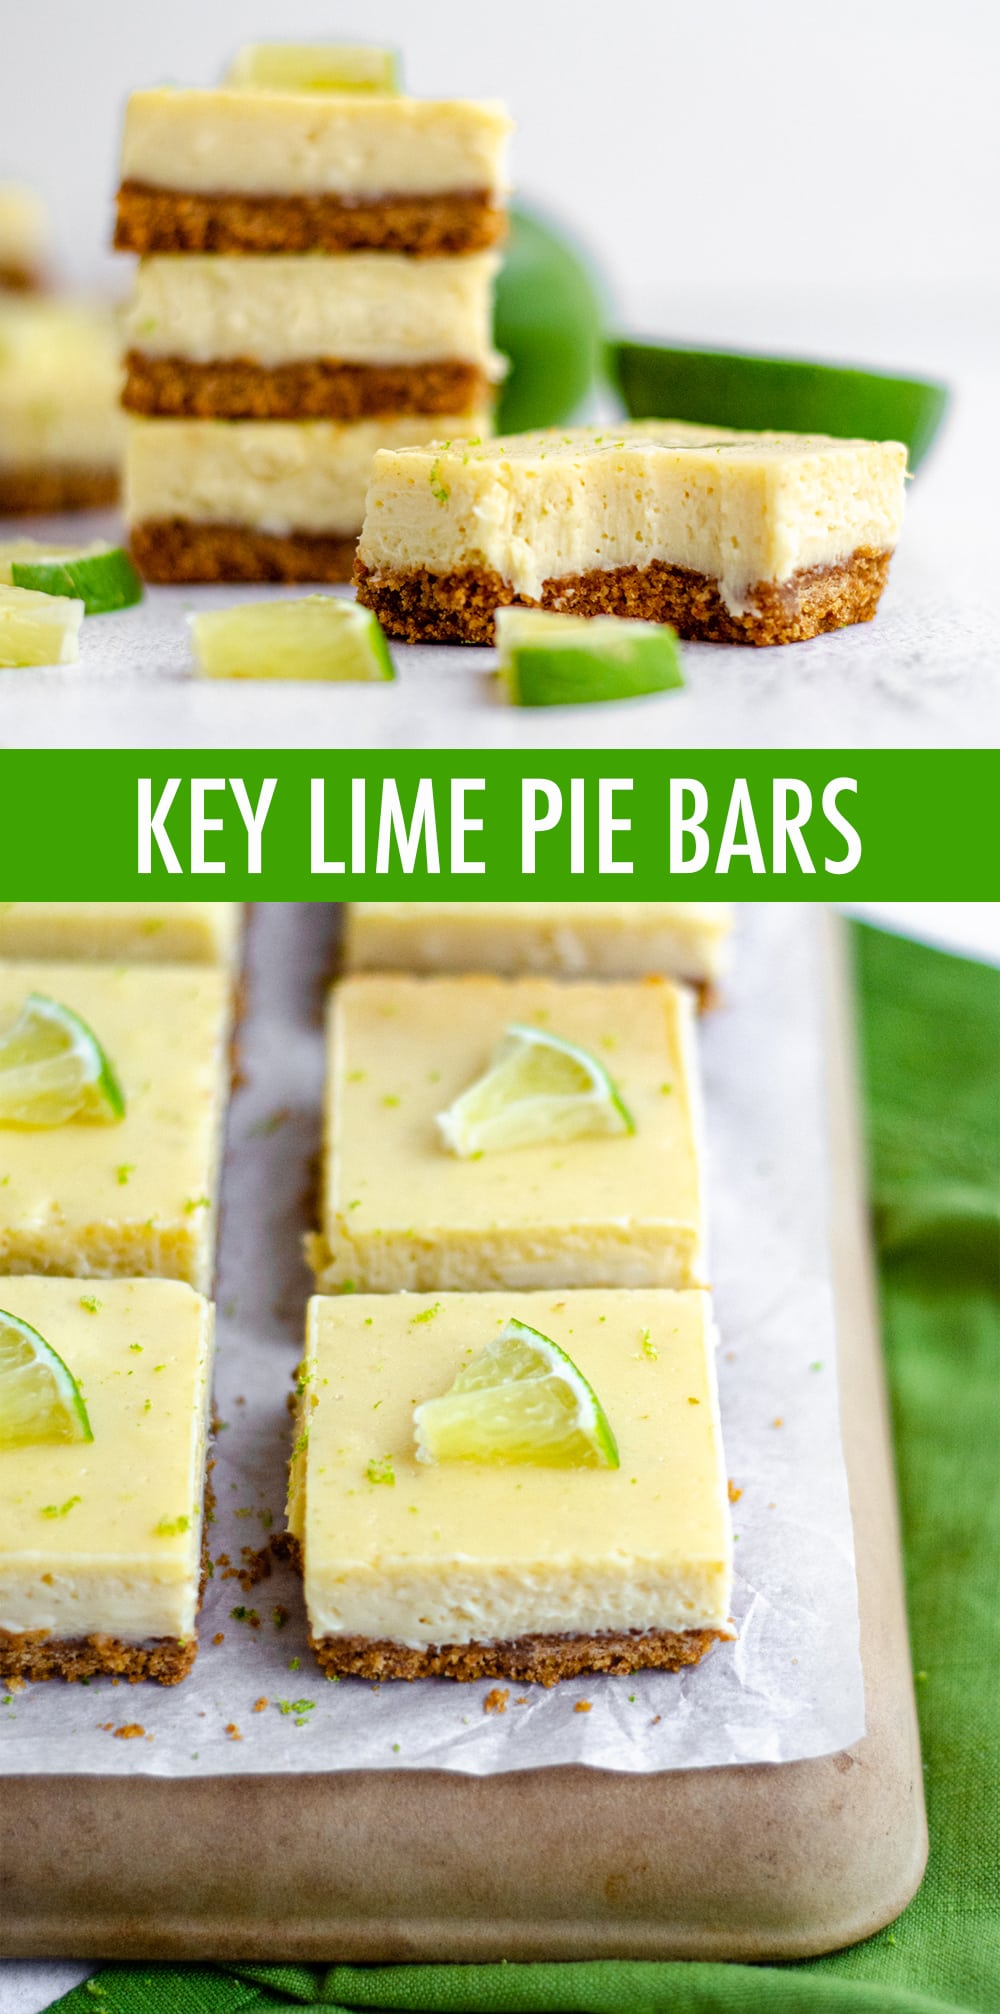 A creamy, tart Key lime pie filling sits on top of a buttery graham cracker crust... It's so much easier than making a whole pie! via @frshaprilflours